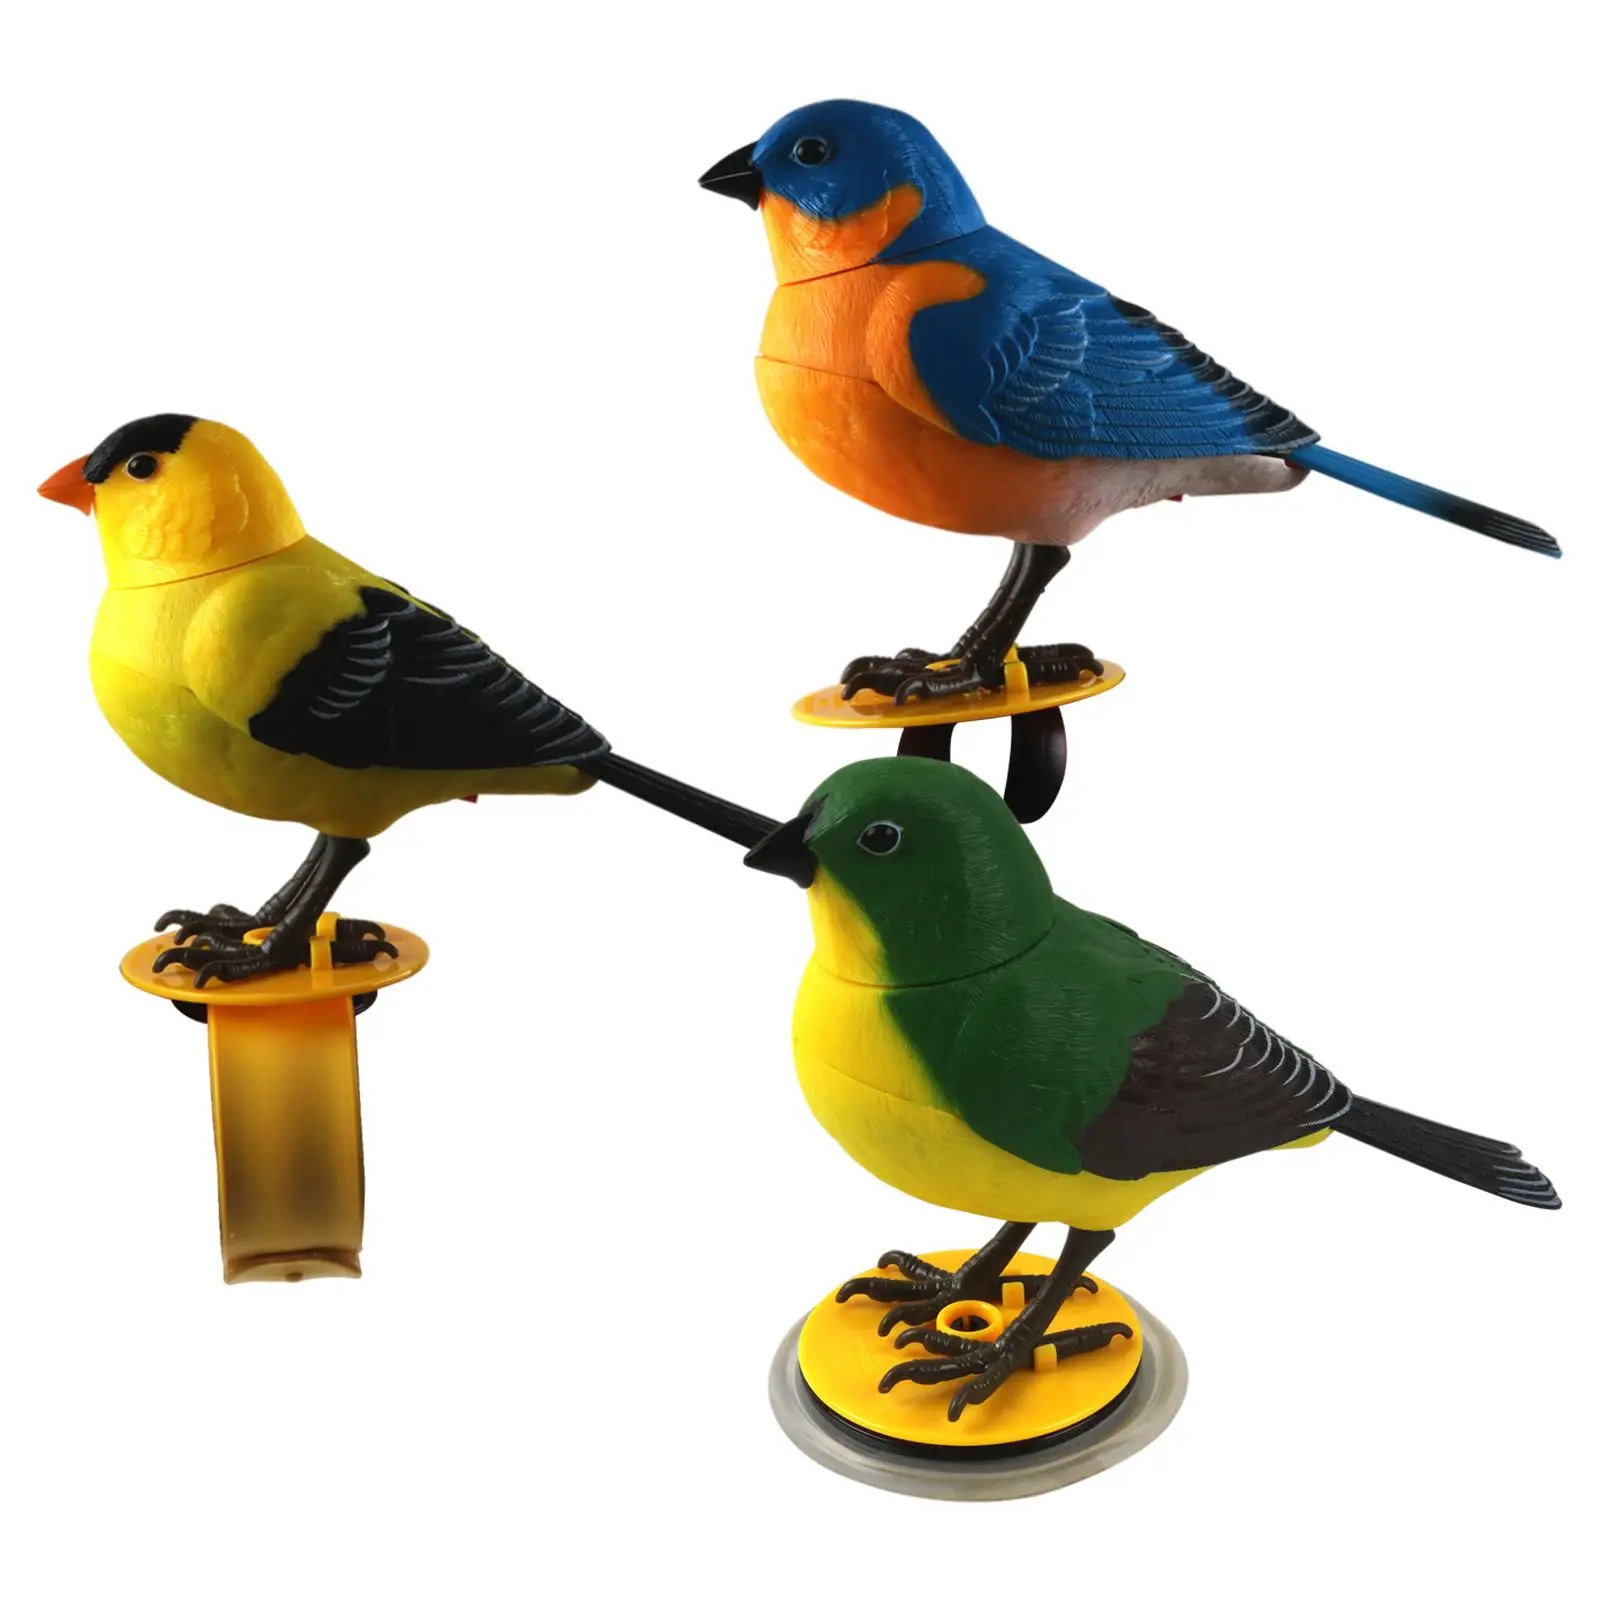 Voice Controlled Bird Pet Activate Playing Toy Kids Talking Parrot for Baby